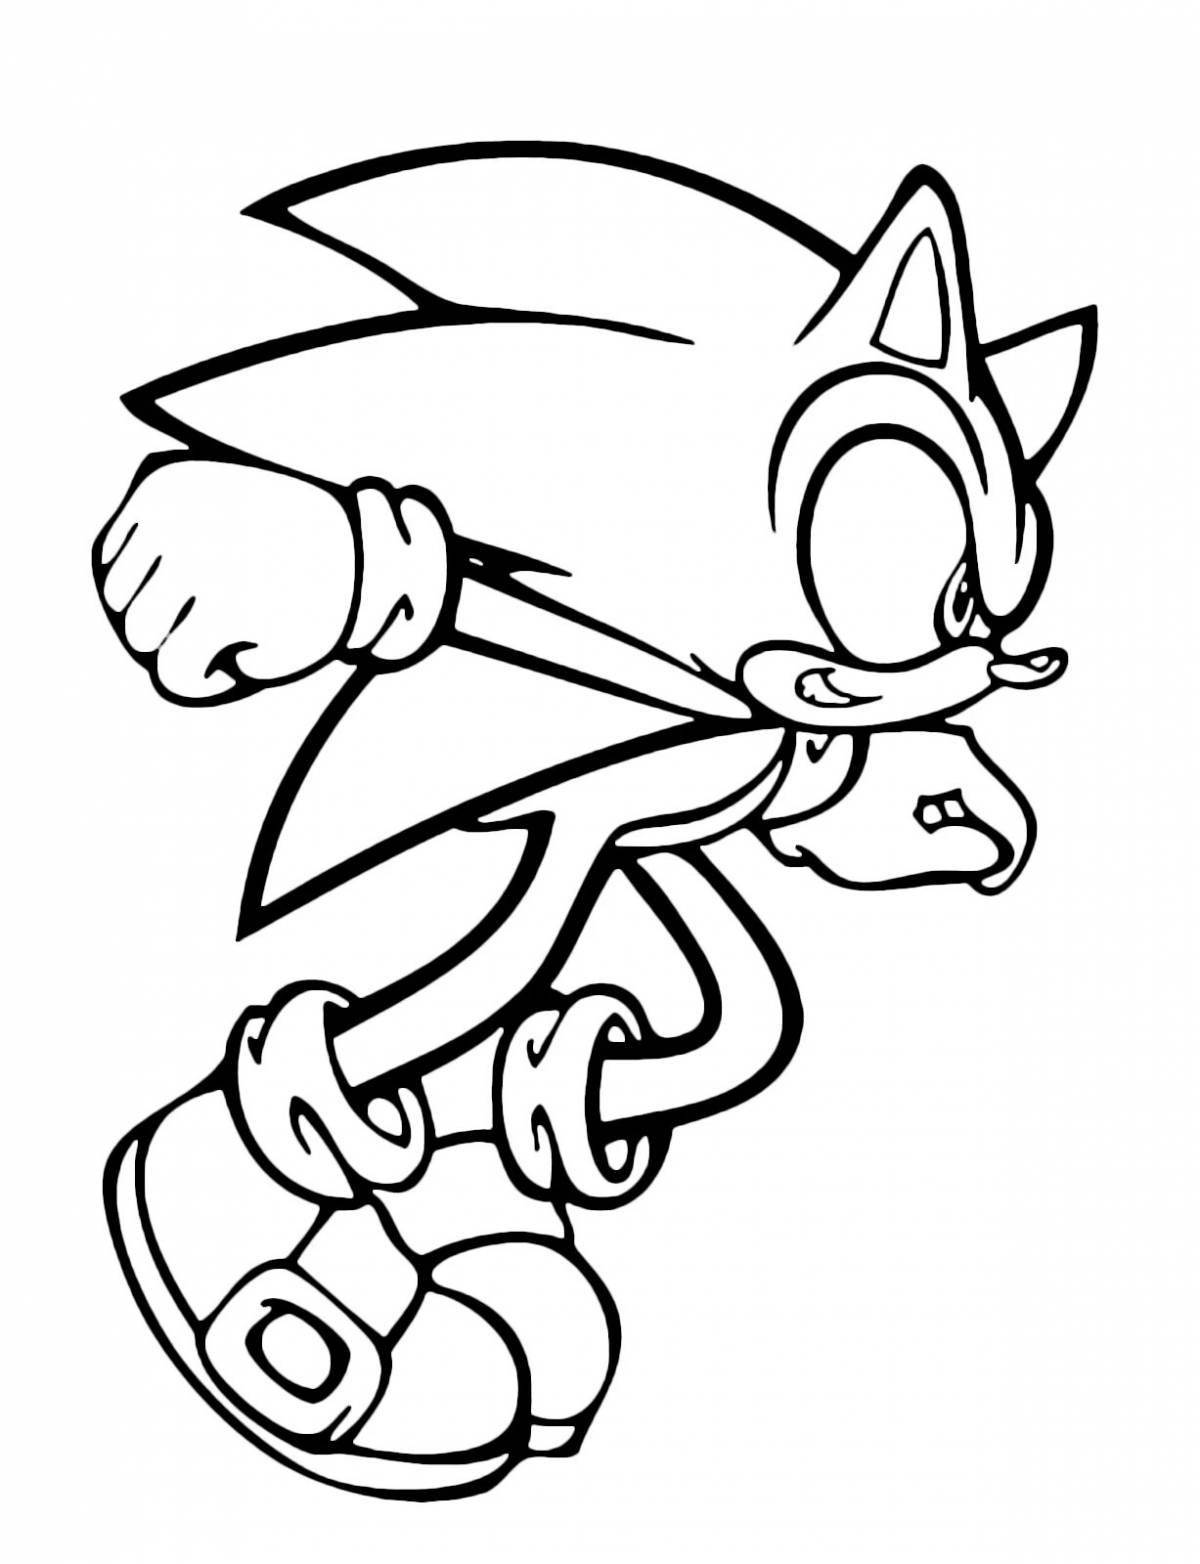 Adorable sonic coloring page